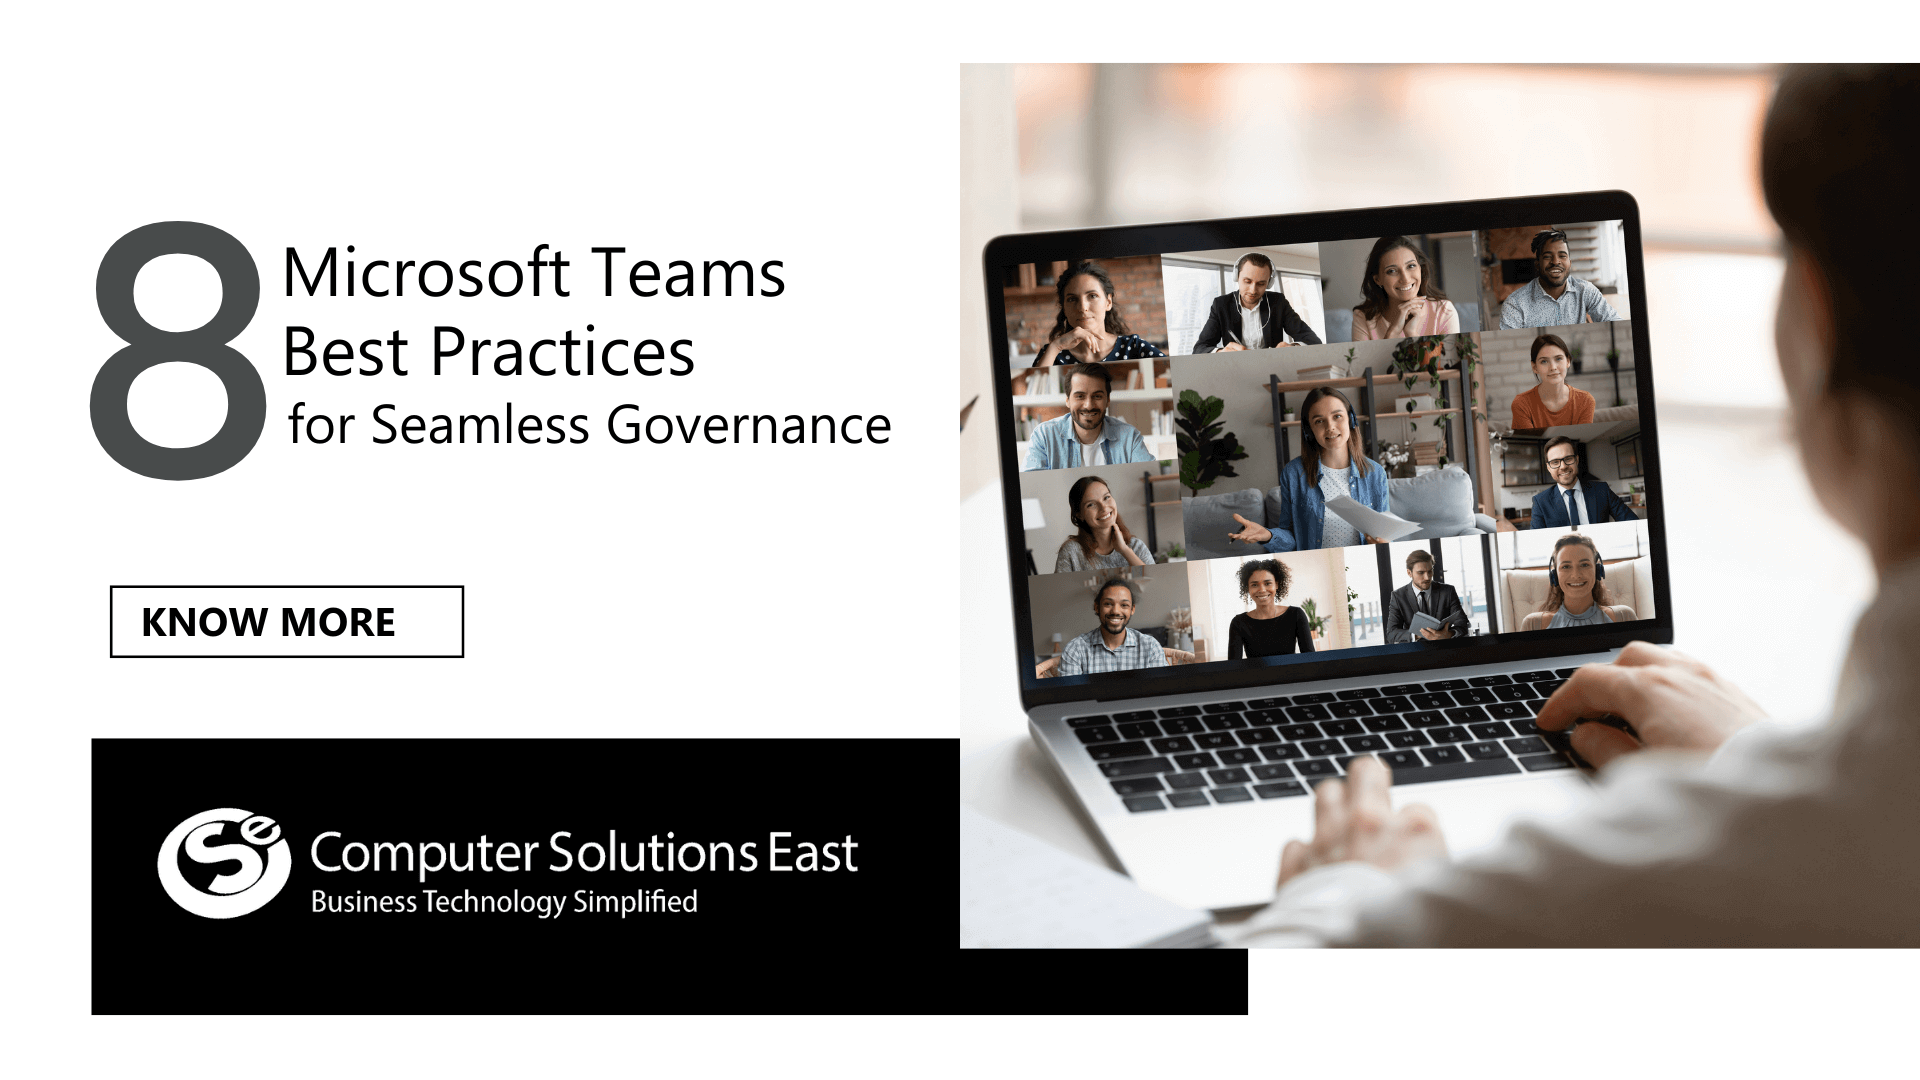 8 Microsoft Teams Best Practices for Seamless Governance